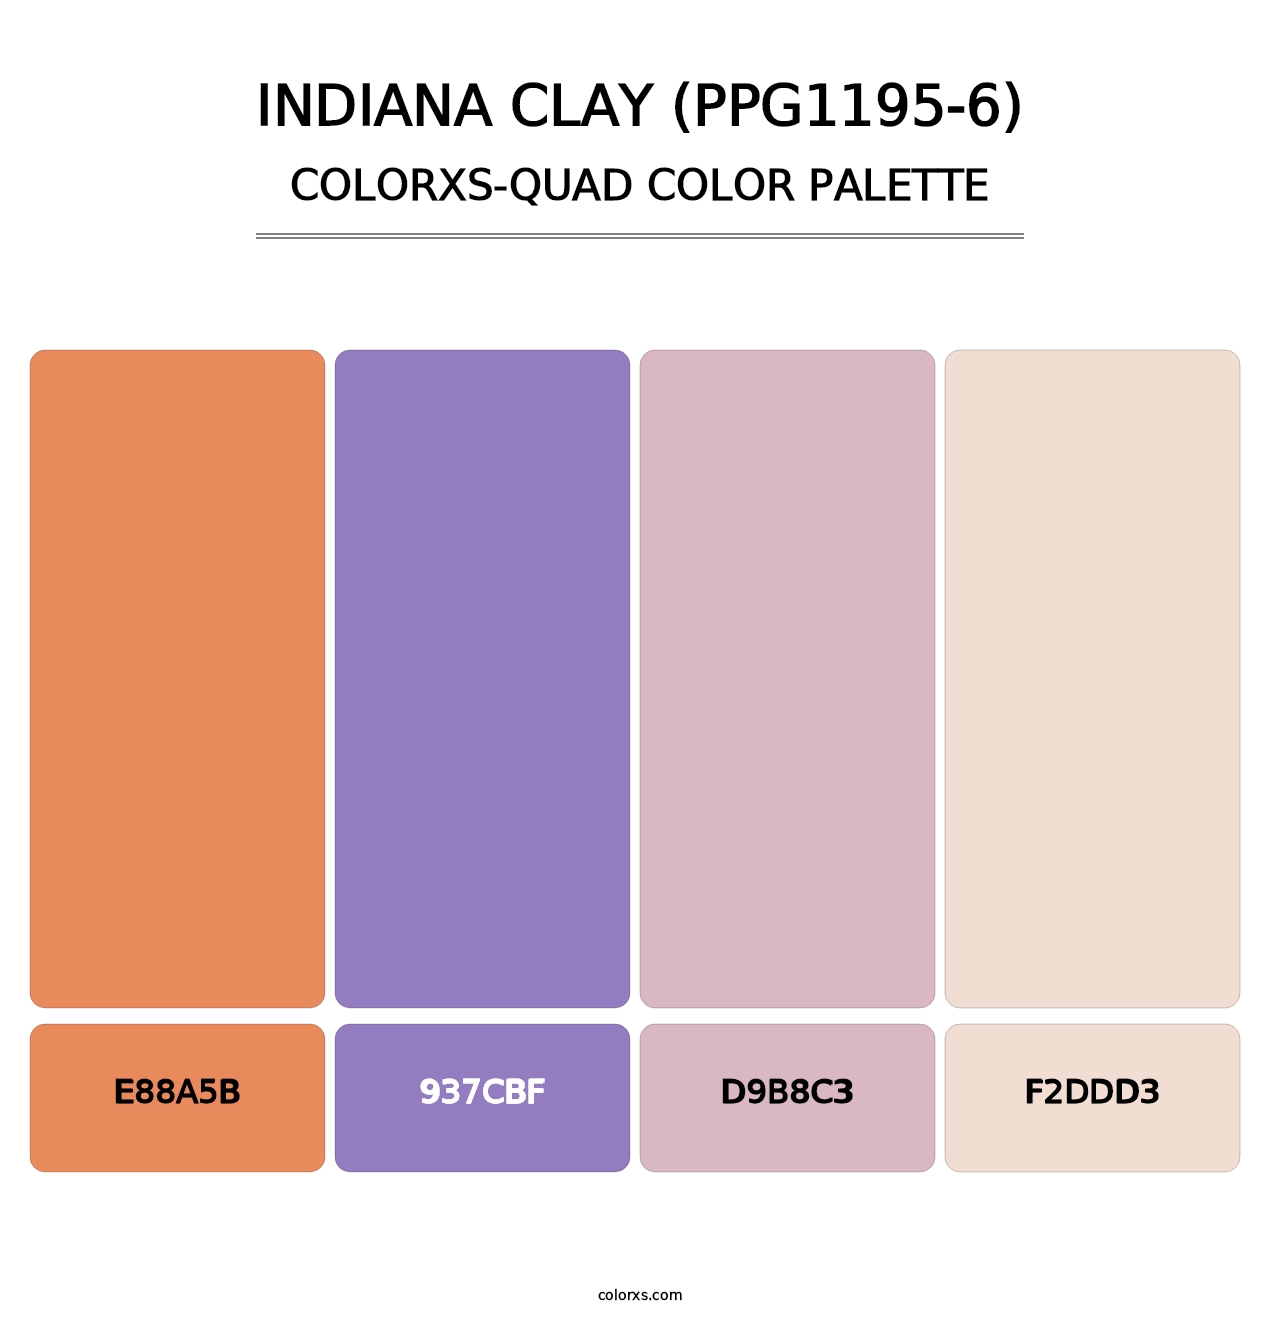 Indiana Clay (PPG1195-6) - Colorxs Quad Palette